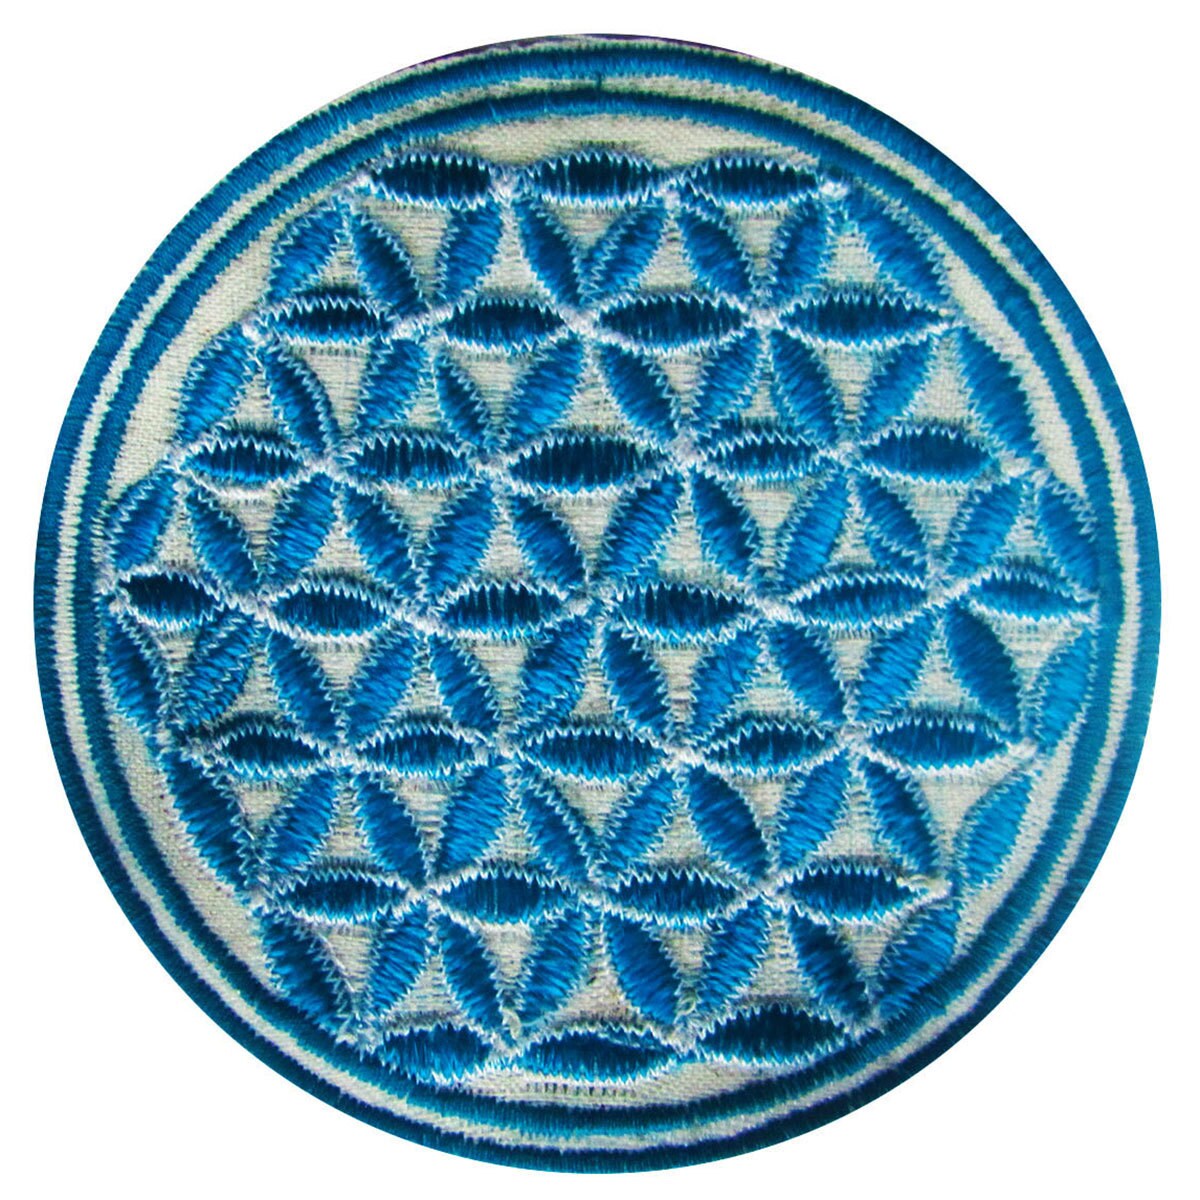 green flower of life patch small size